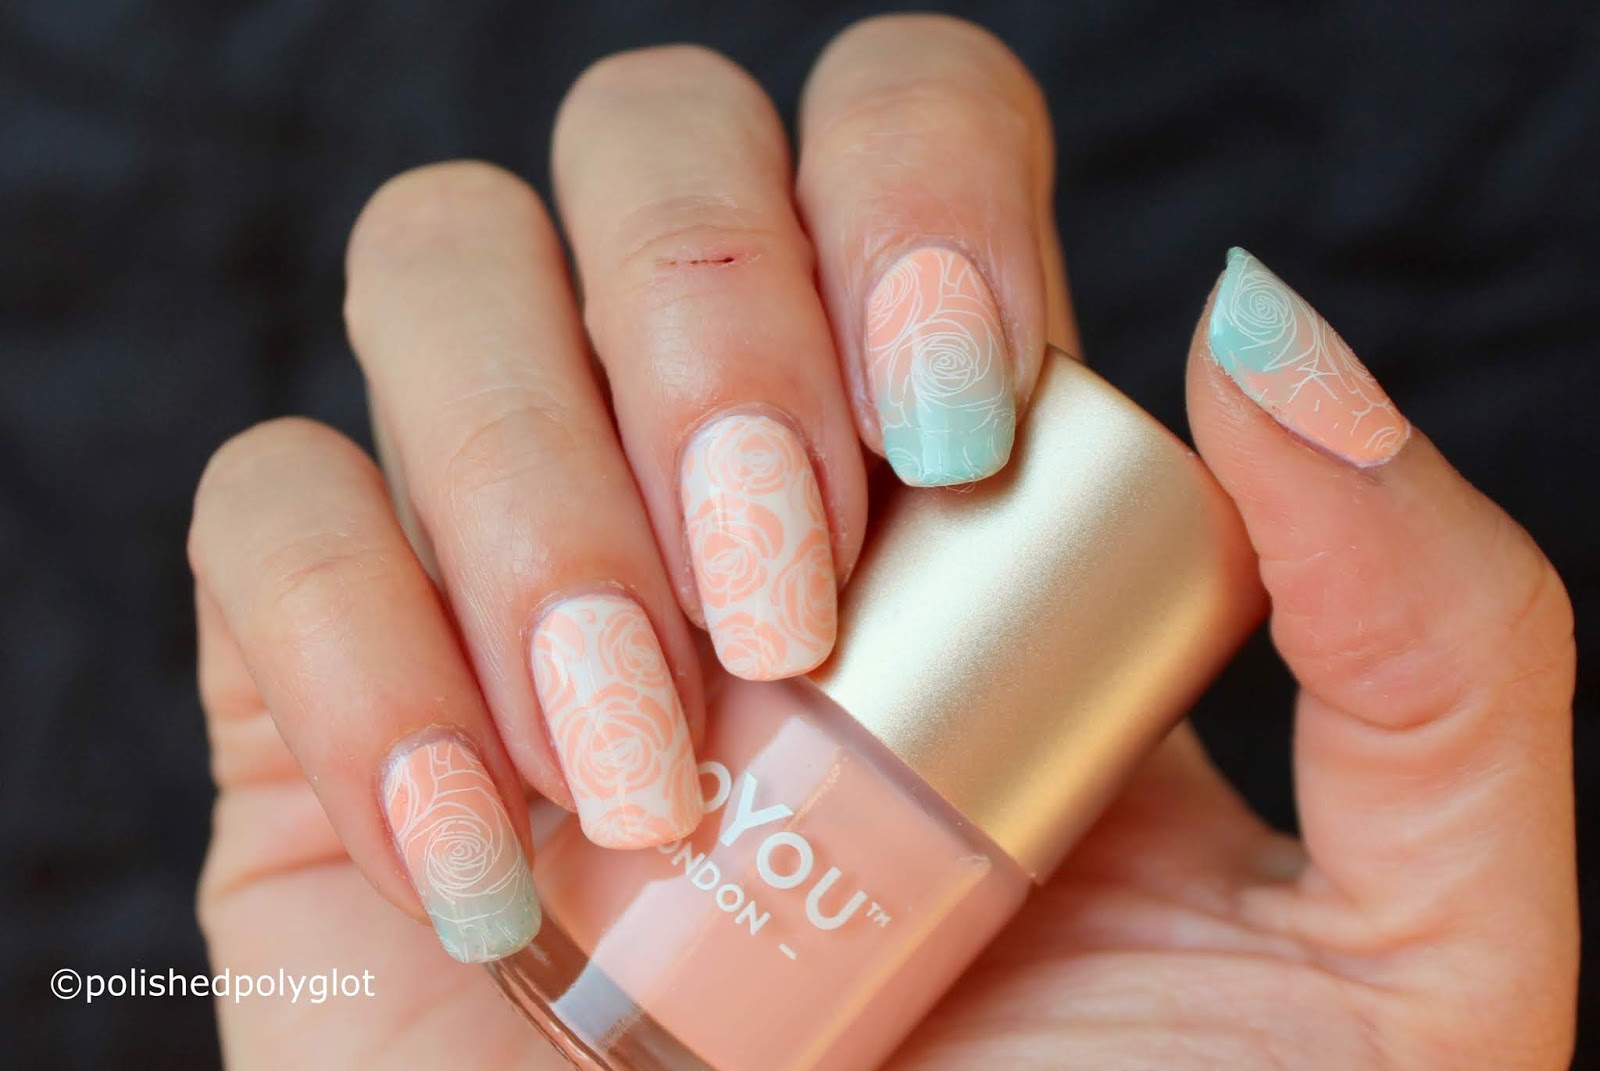 1. Pastel Blue and White Floral Nail Art - wide 5